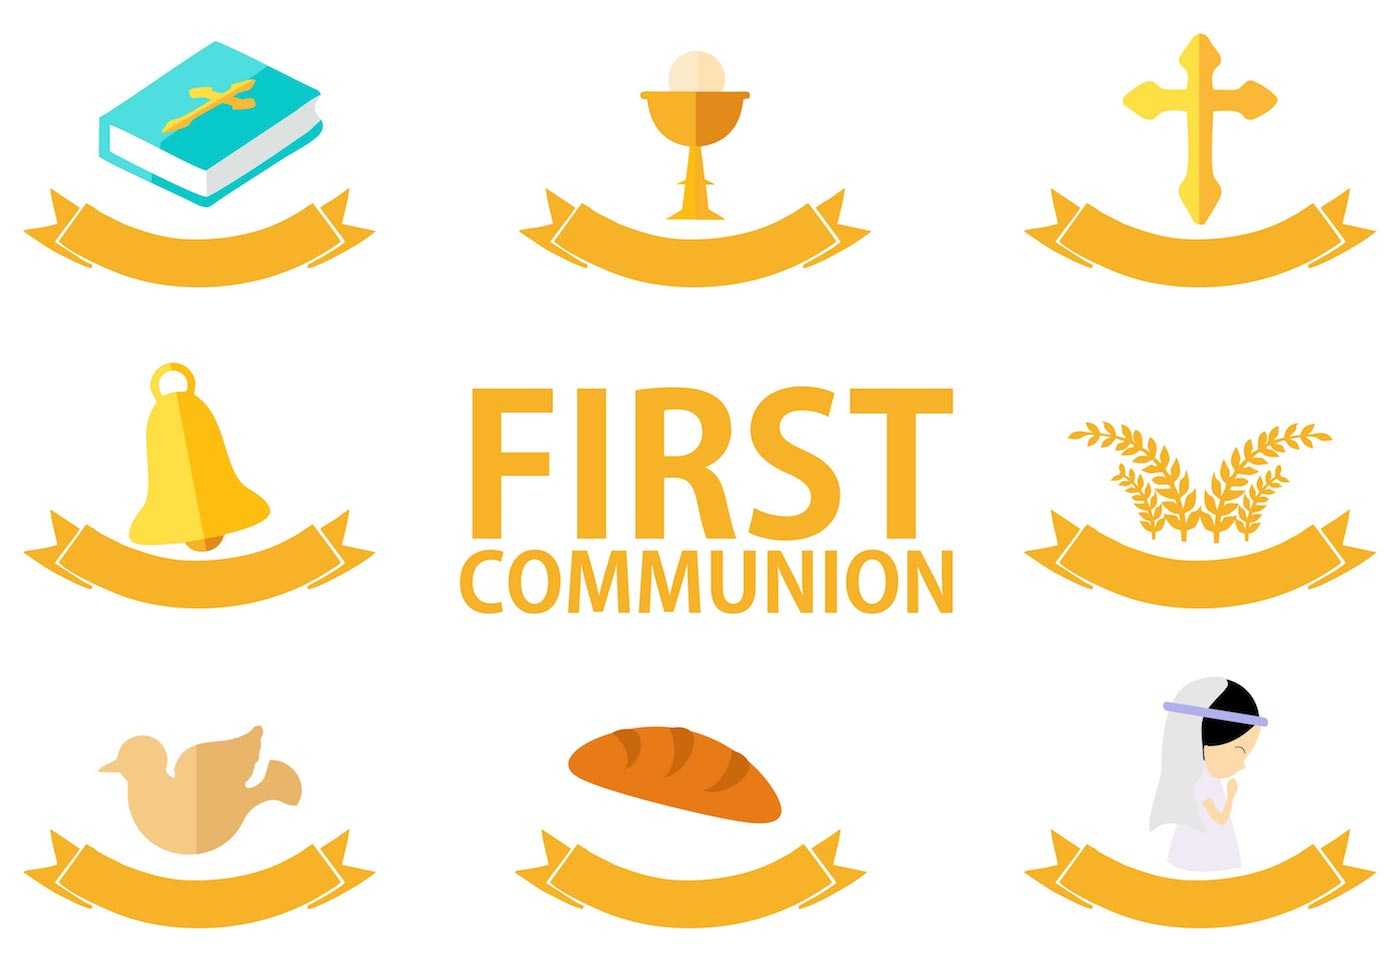 First Communion Template Free Vector Art – (25 Free Downloads) Pertaining To First Communion Banner Templates